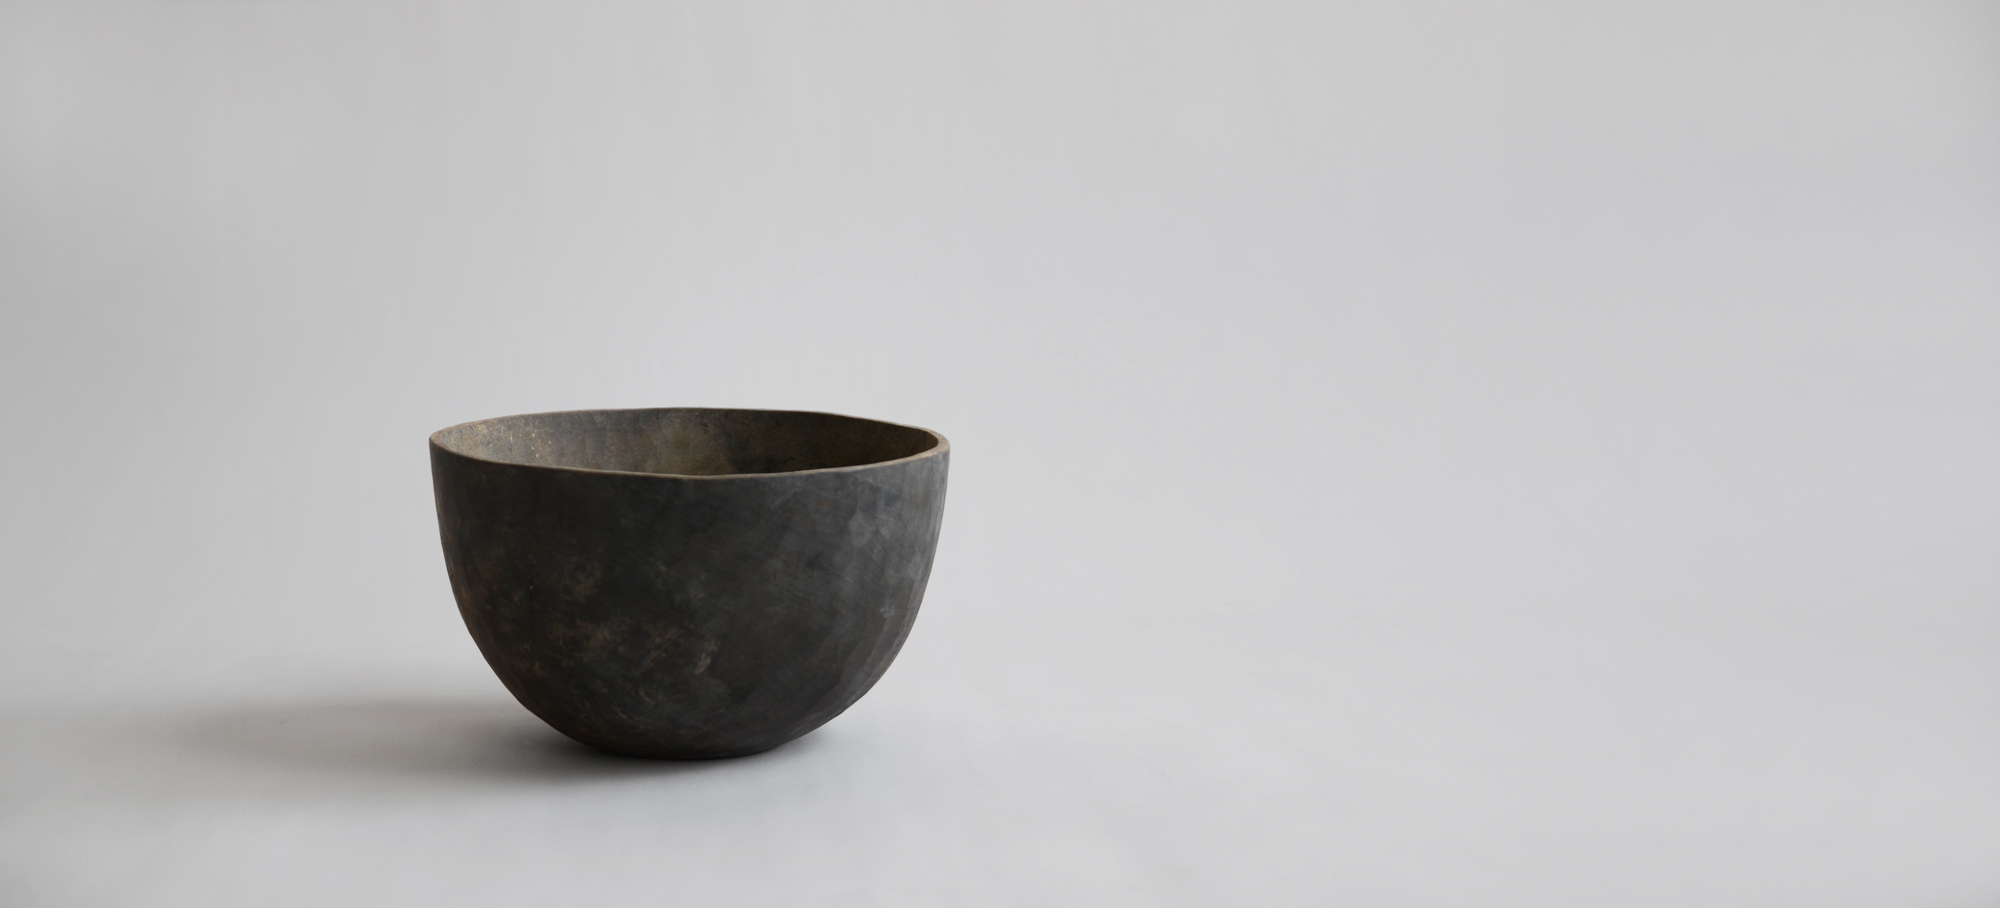 Image of a wood bowl by Ryuji Mitani carved and lacquered to appear very rustic